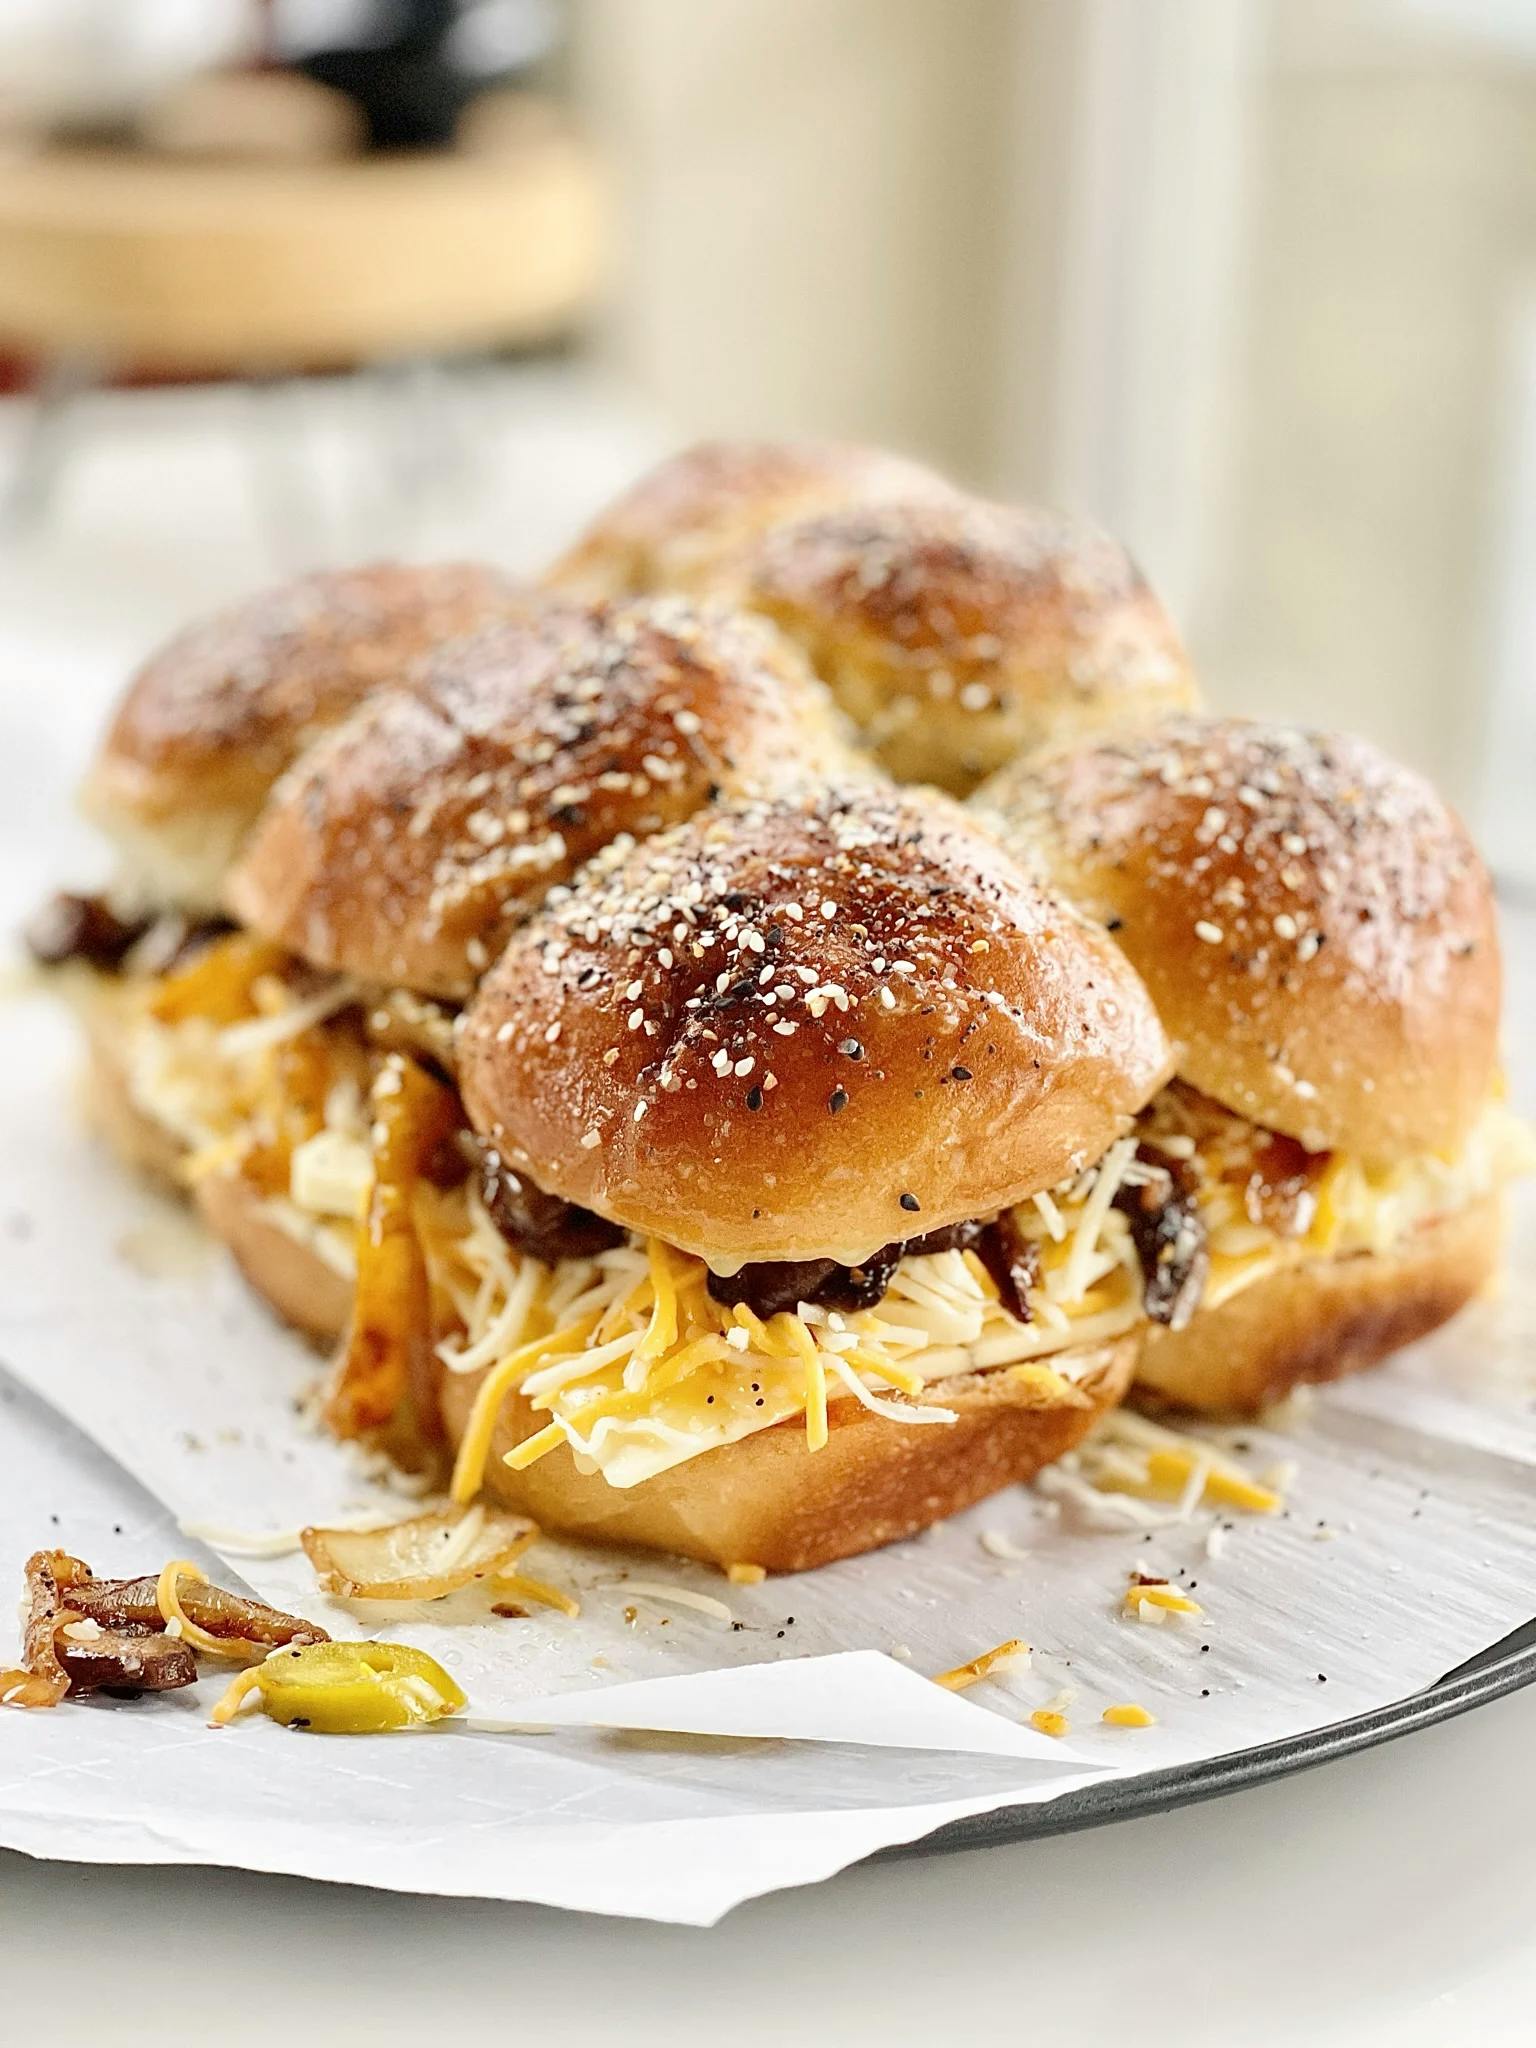 Picture for Cheesy Beef Slider Sandwiches